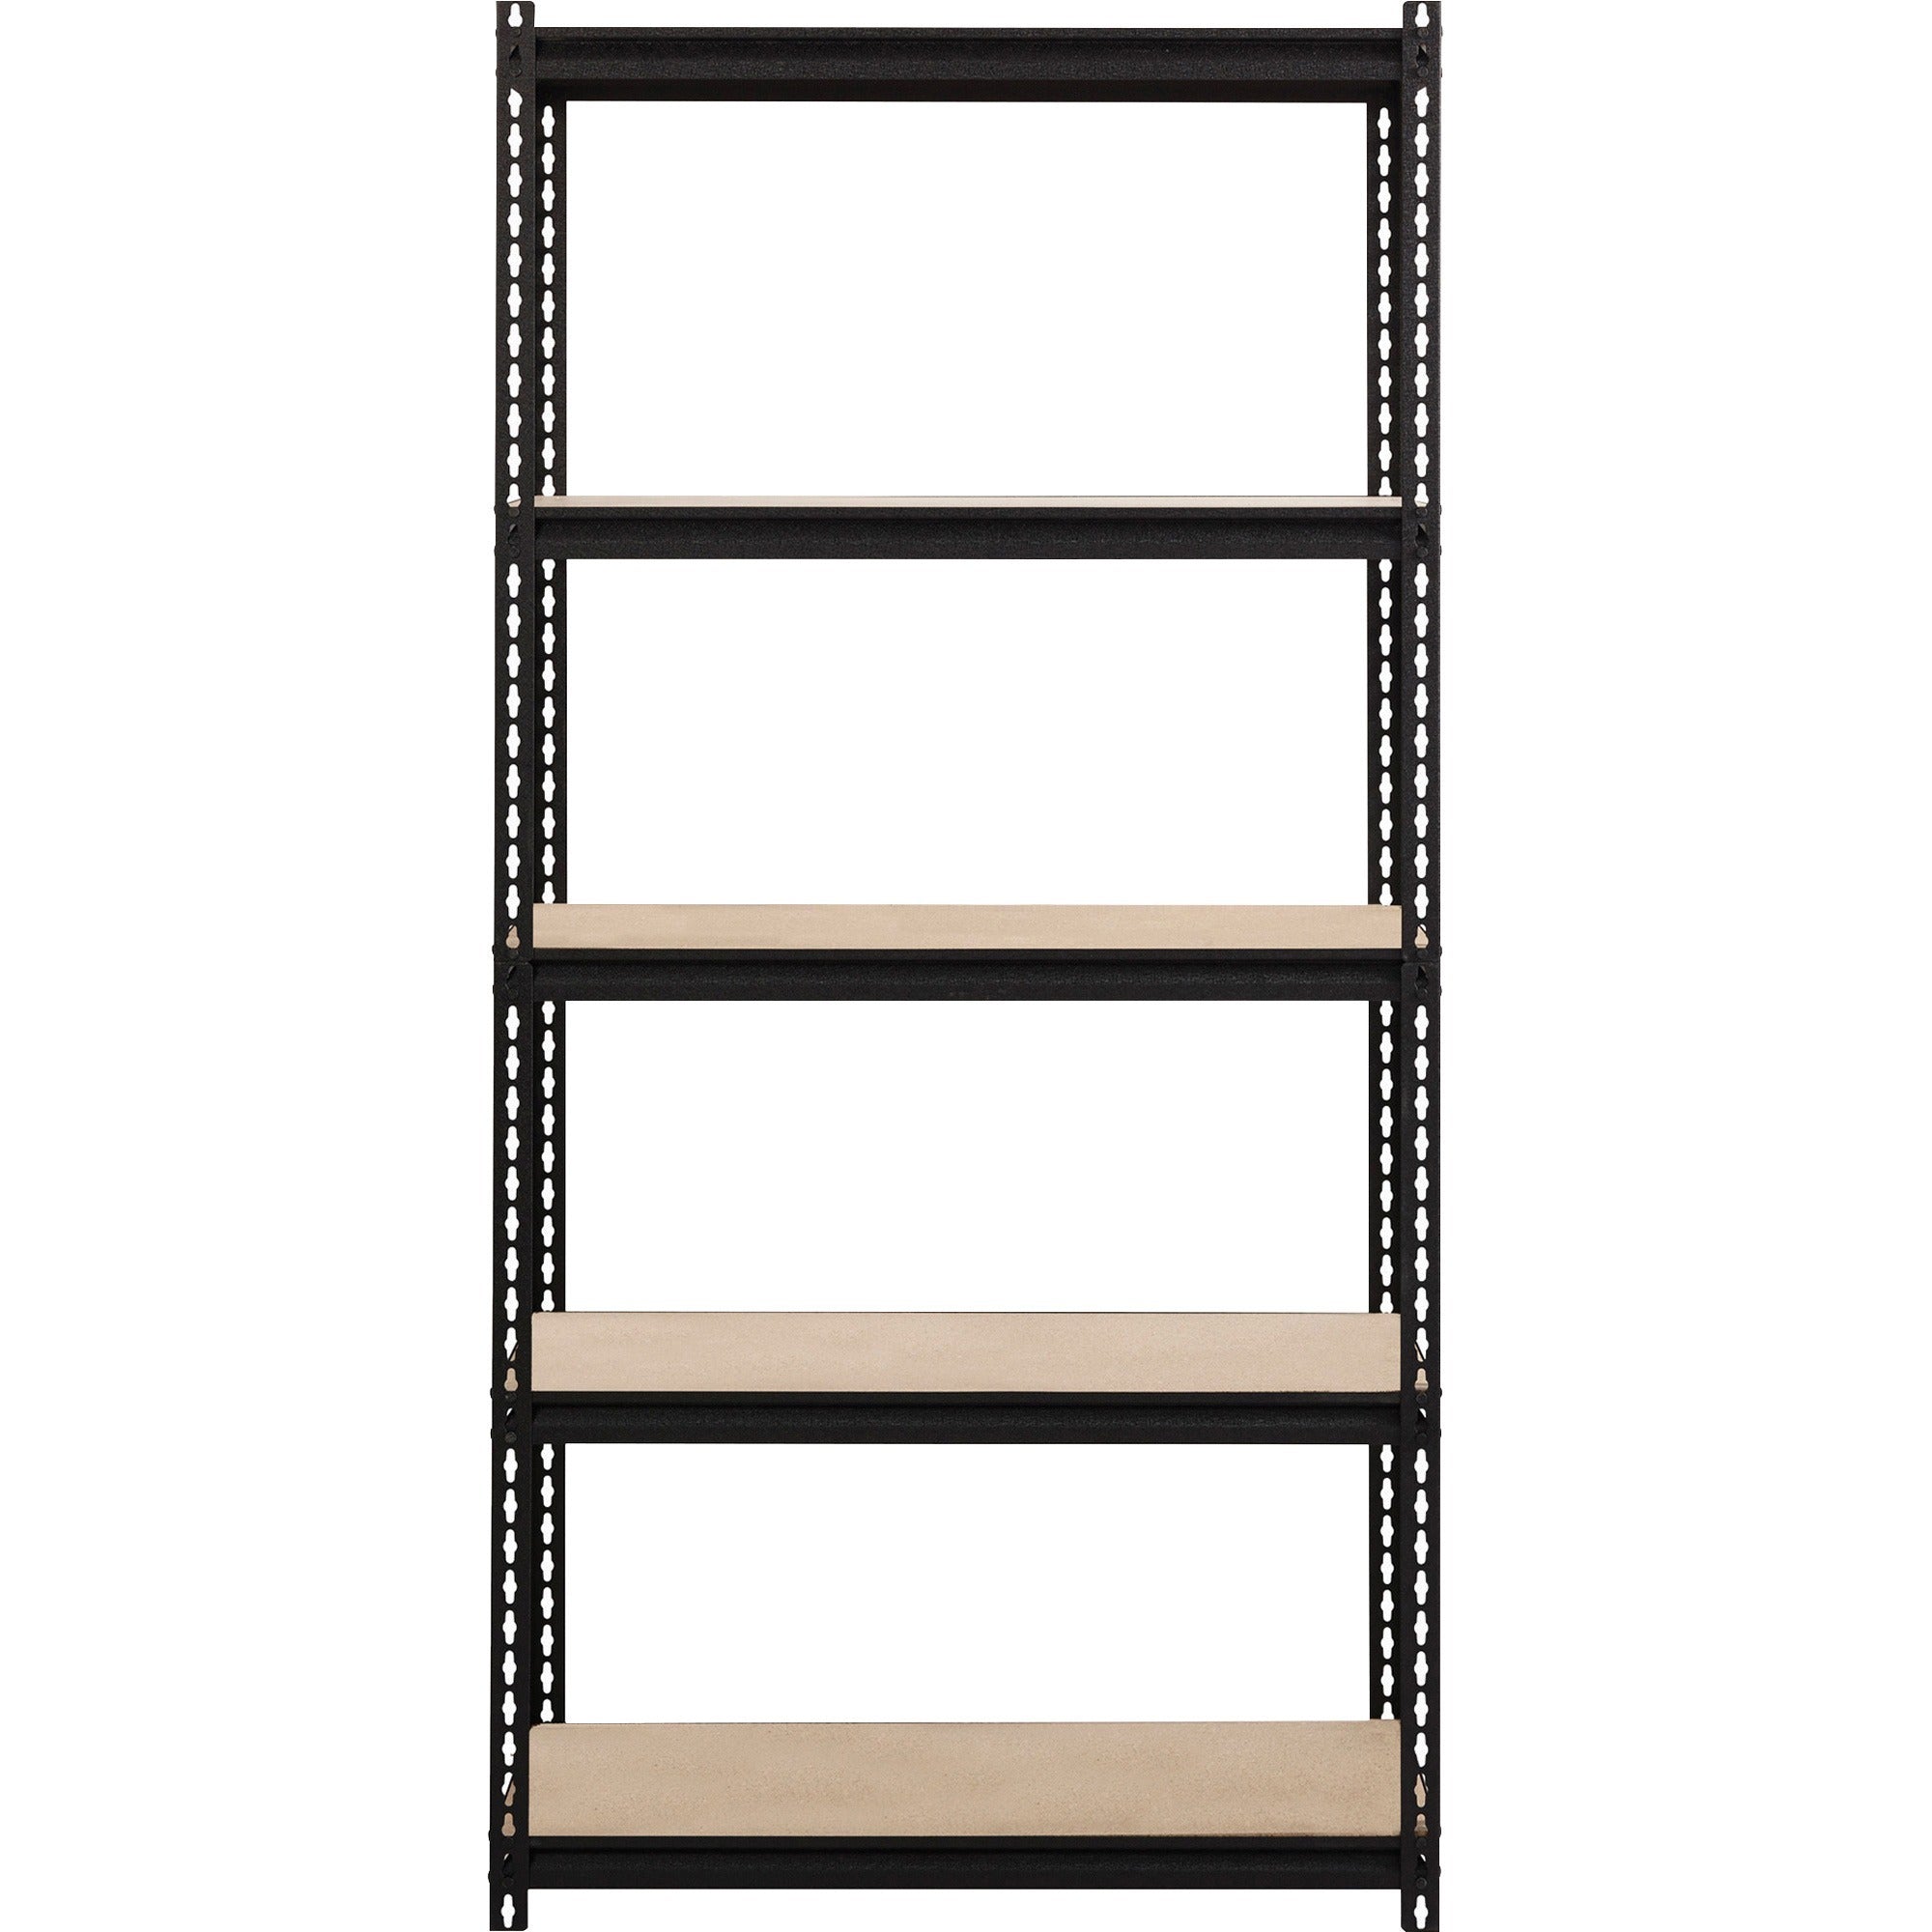 lorell-iron-horse-2300-lb-capacity-riveted-shelving-5-shelfves-72-height-x-36-width-x-18-depth-30%-recycled-black-steel-particleboard-1-each_llr59697 - 1